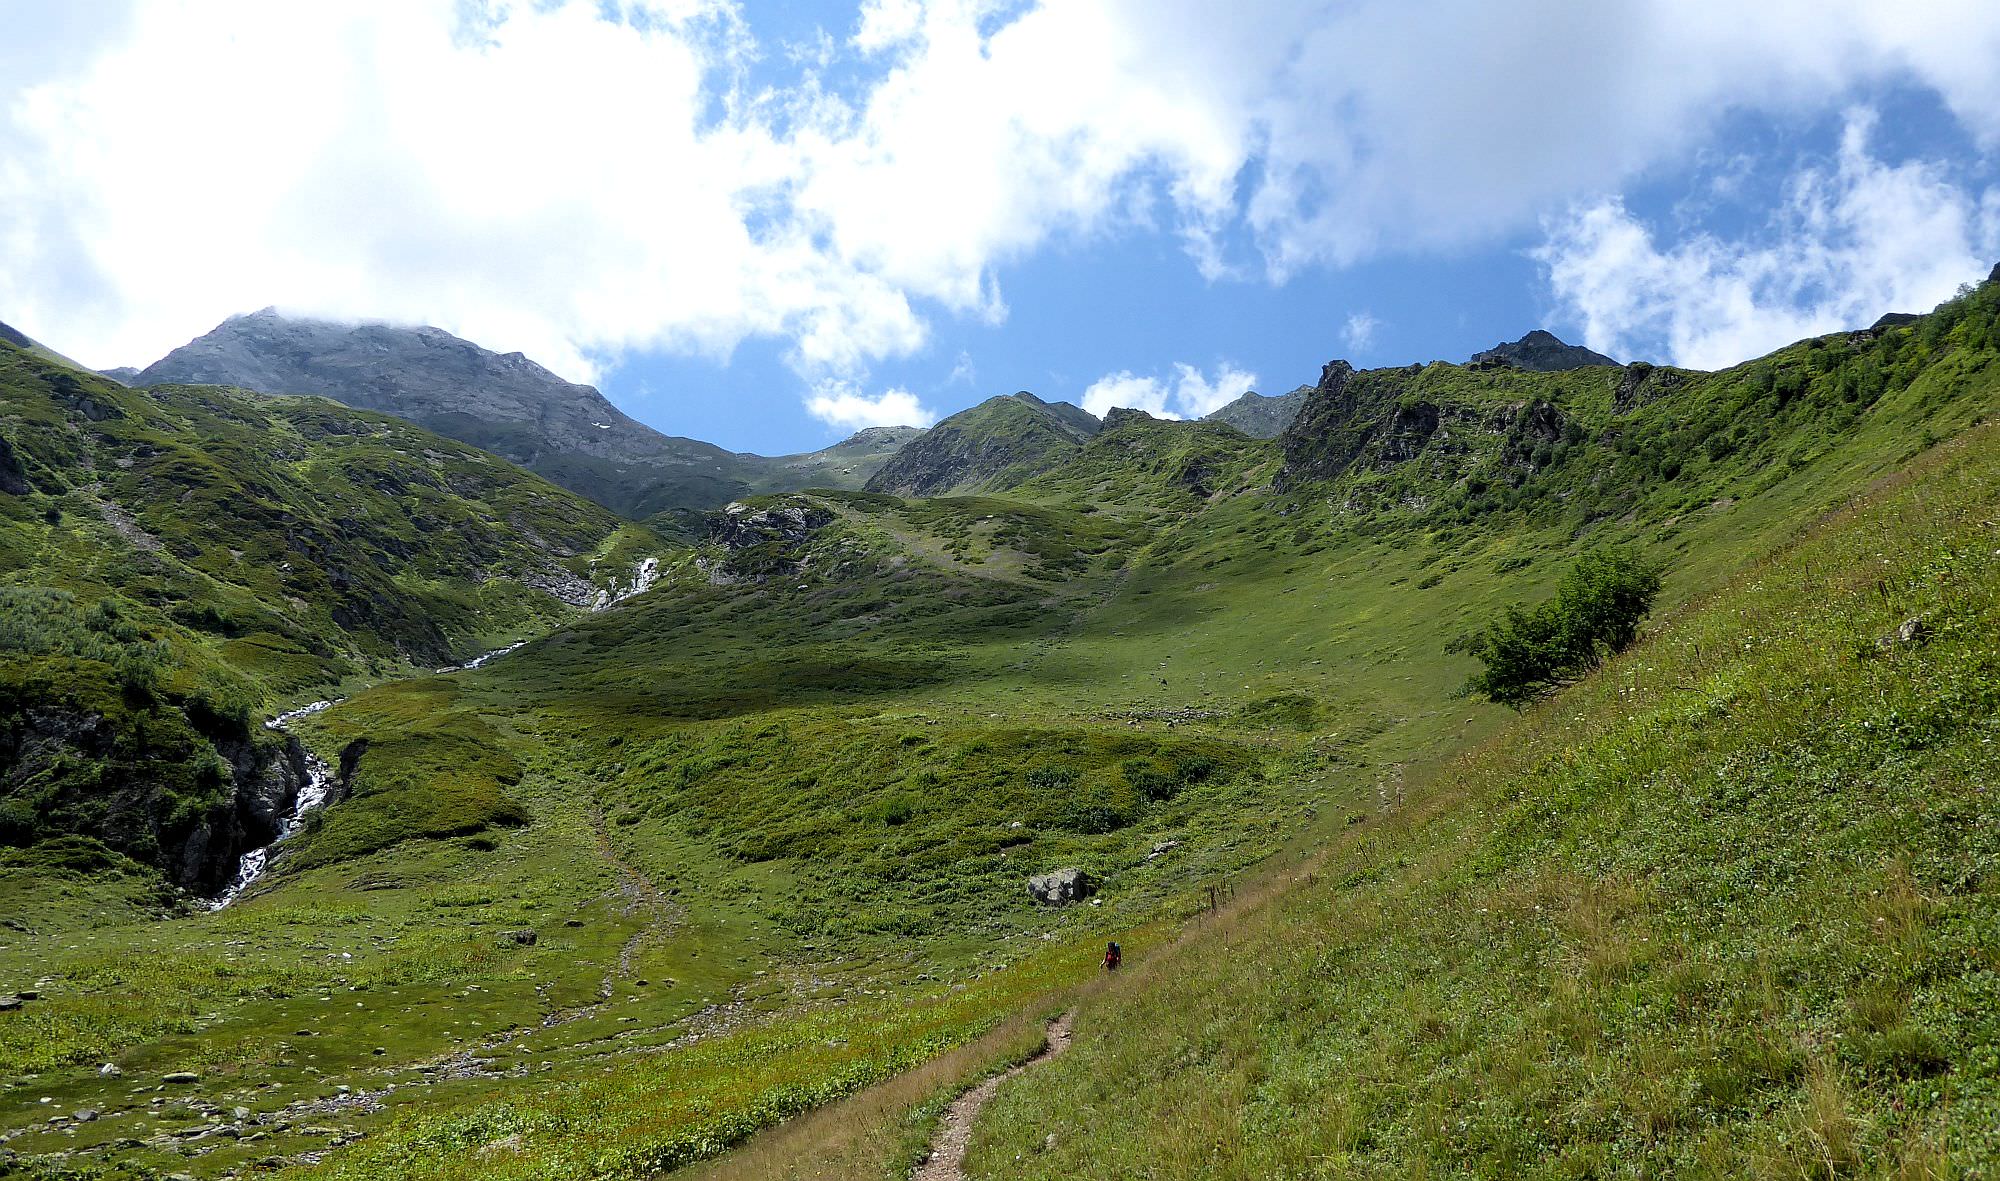 Towards the Chizdhi pass